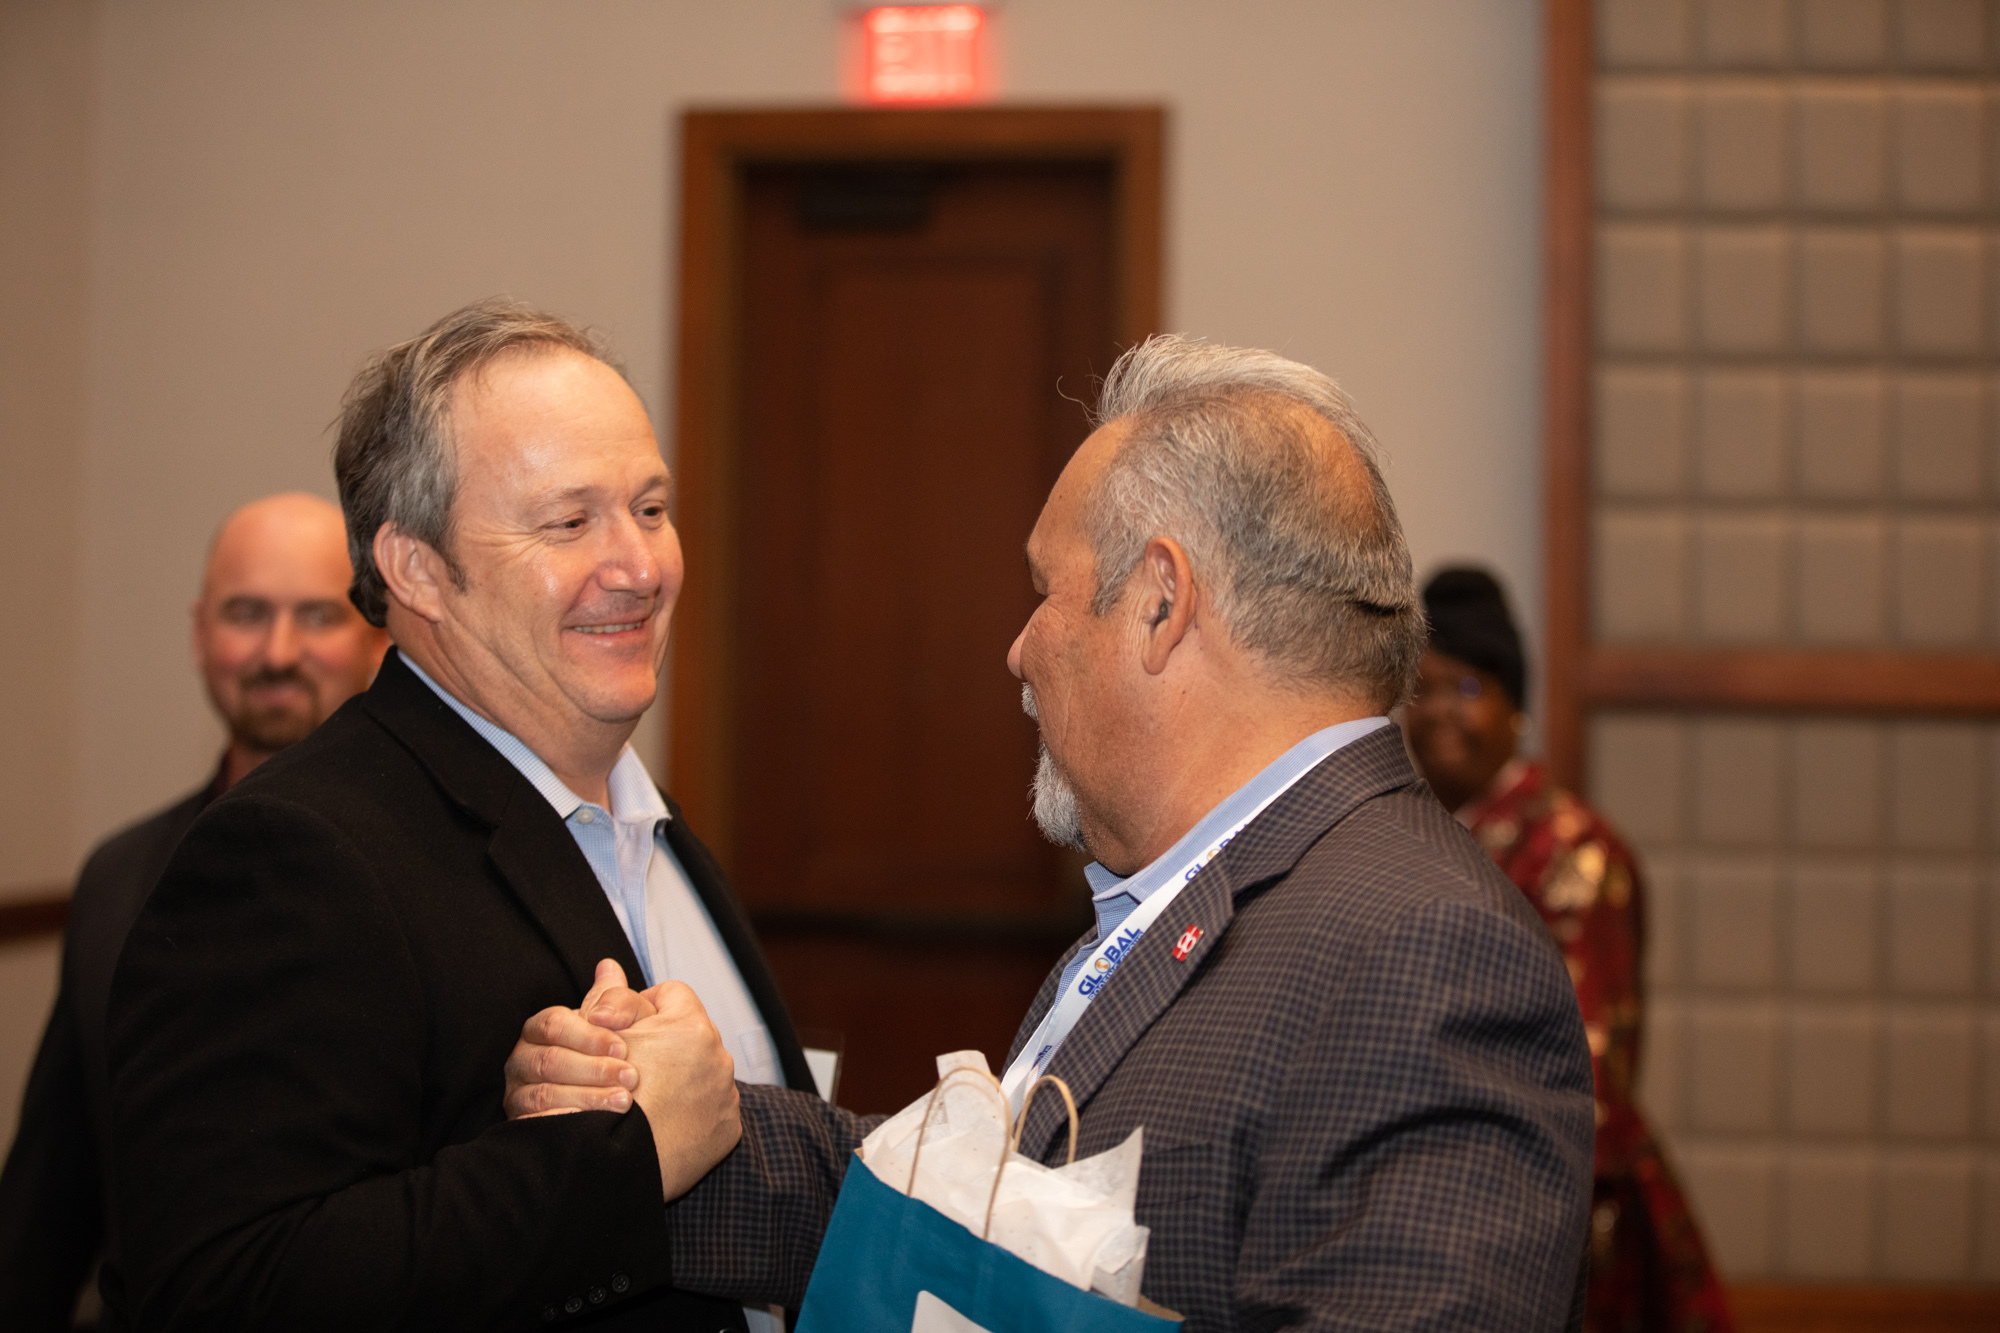 Two members of the ABA Board of Directors shaking hands at an event.